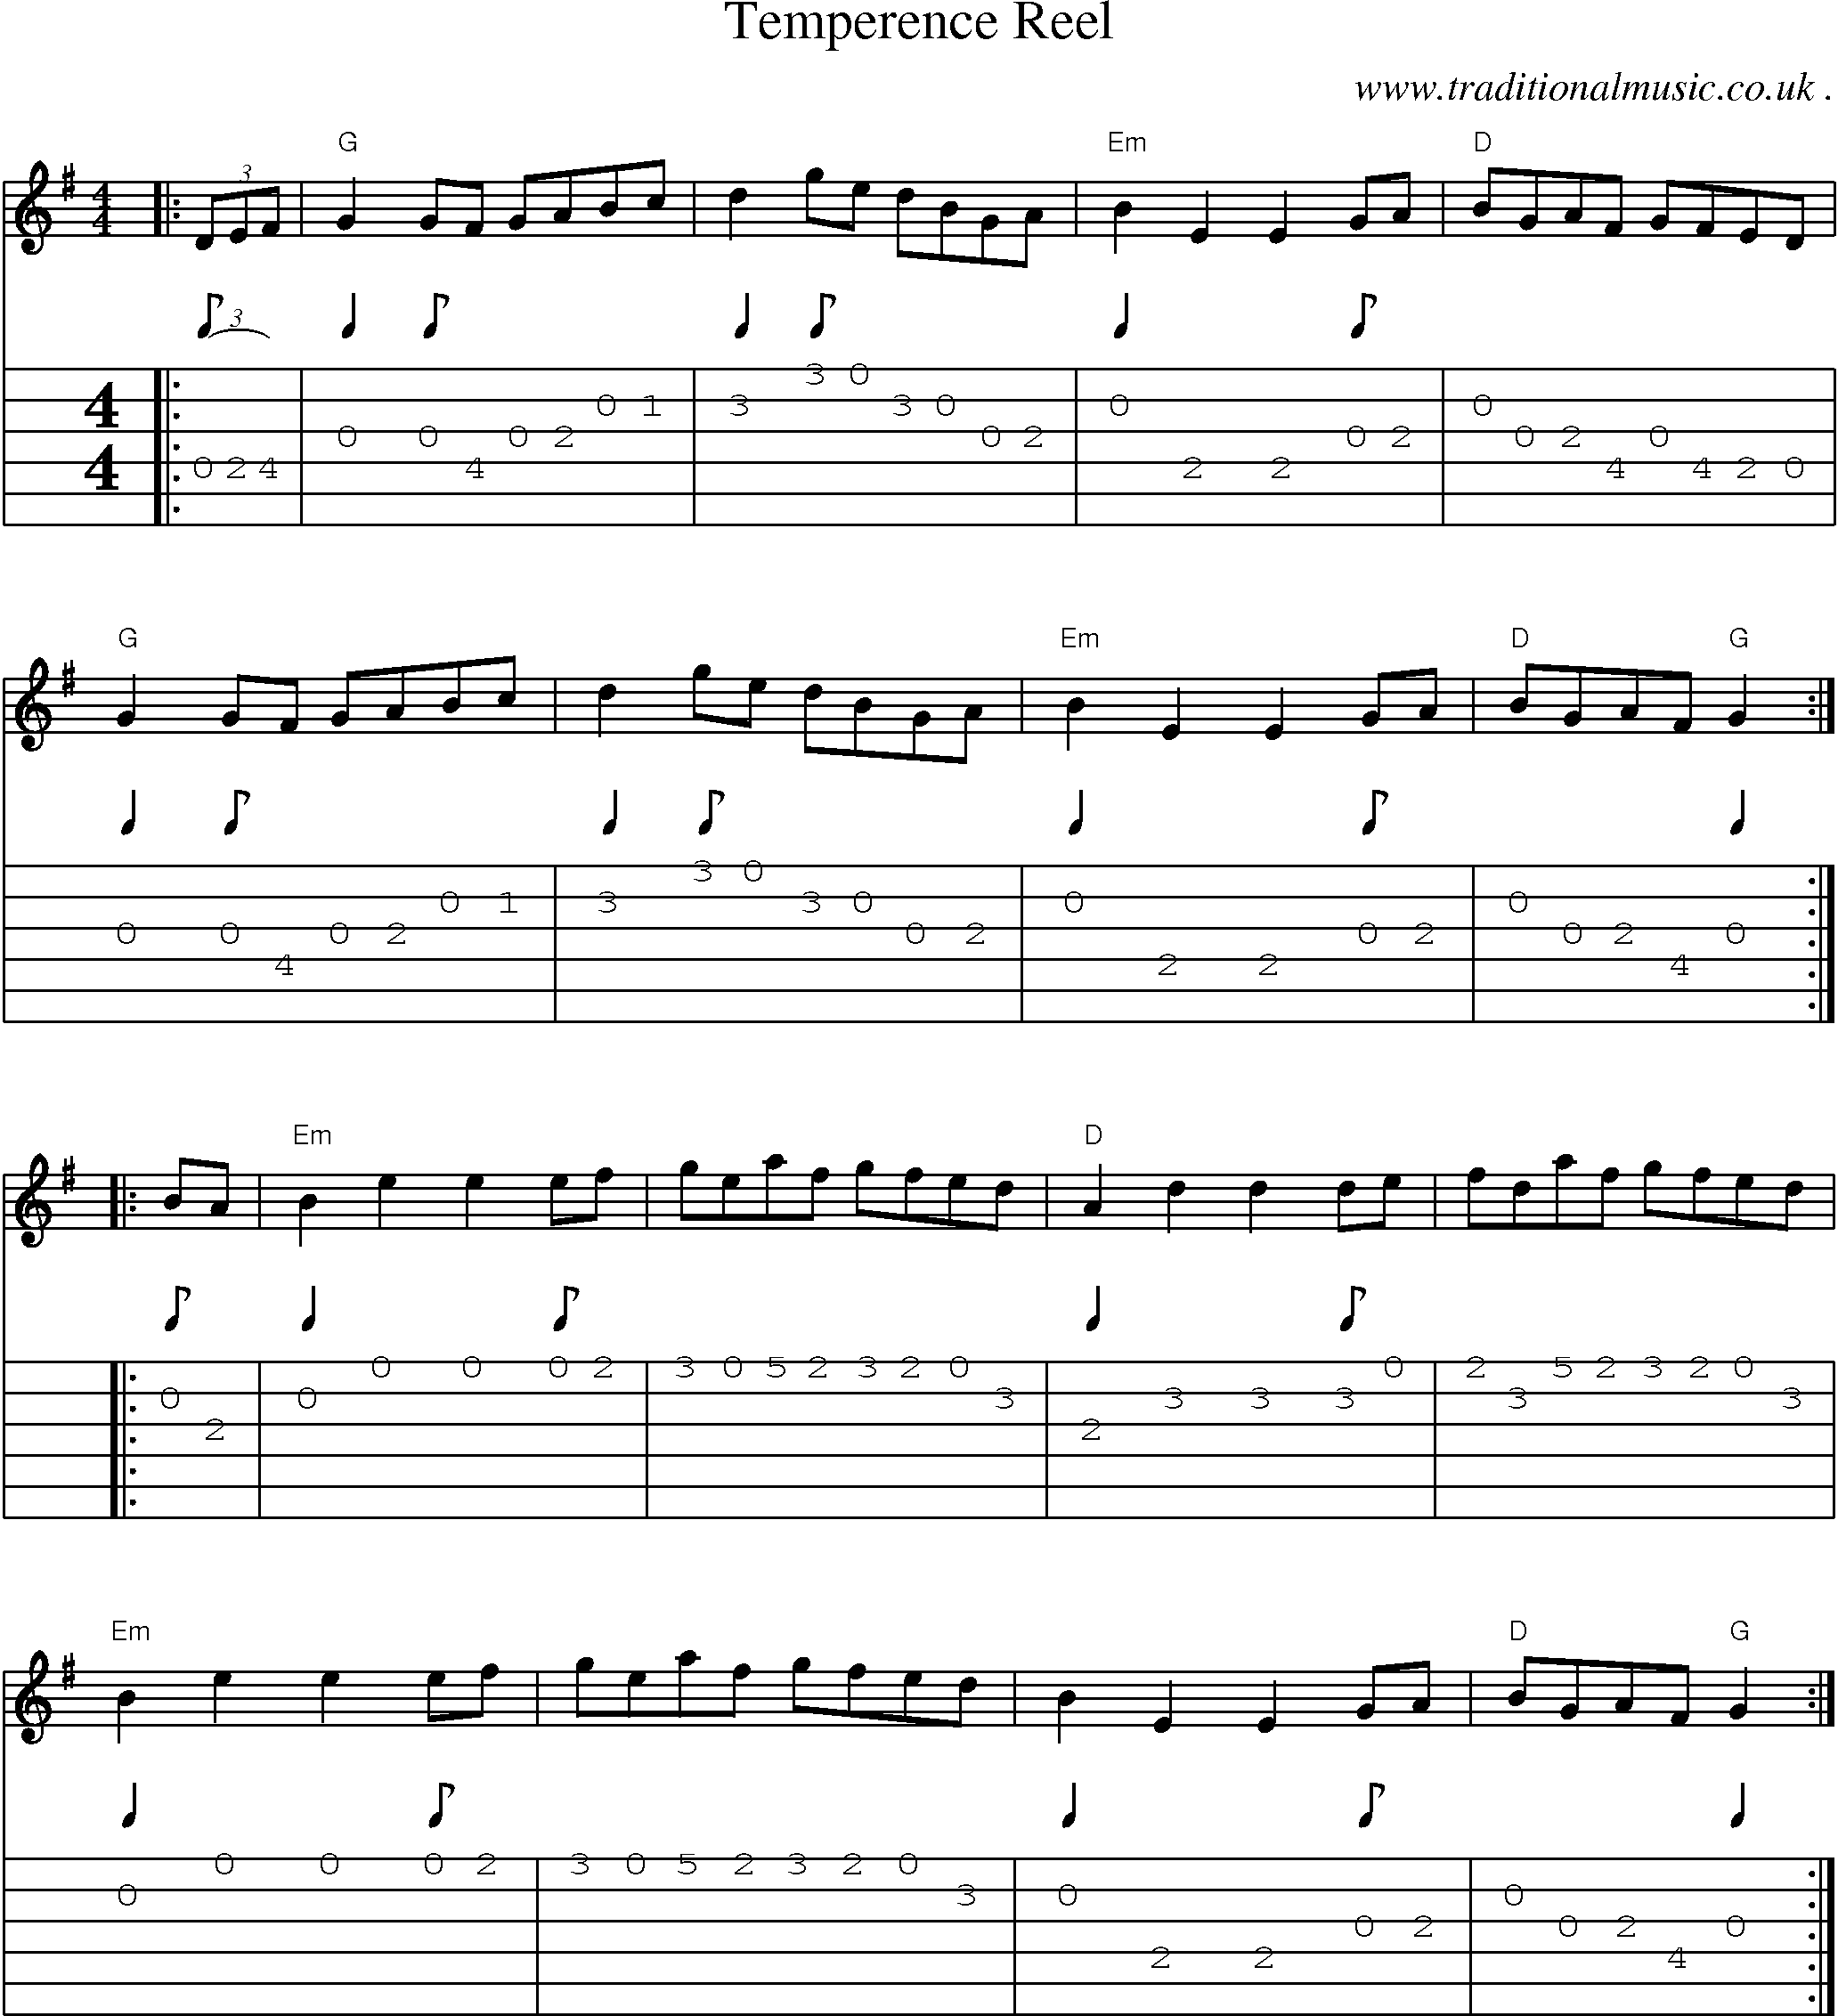 Music Score and Guitar Tabs for Temperence Reel